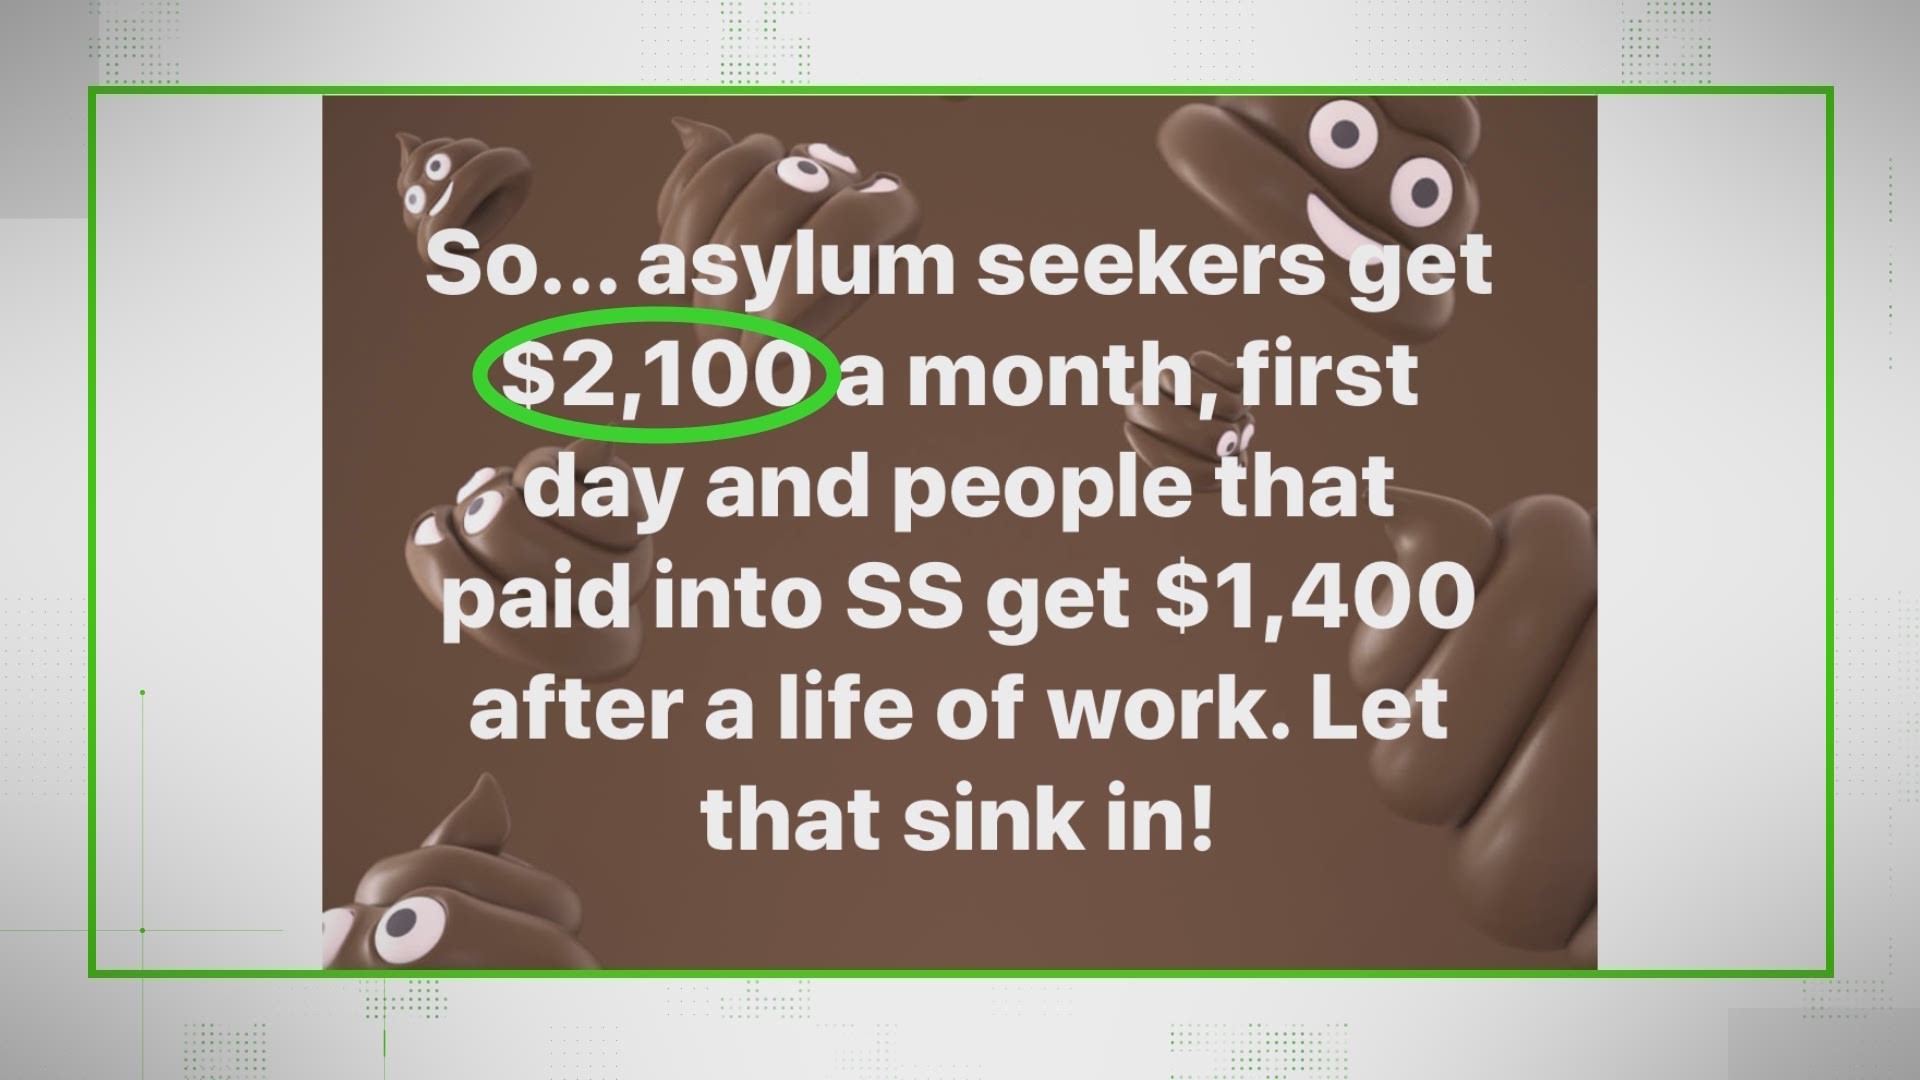 A viral Facebook image claims asylum seekers get more money than those on Social Security. The VERIFY team found the facts don't support that claim.